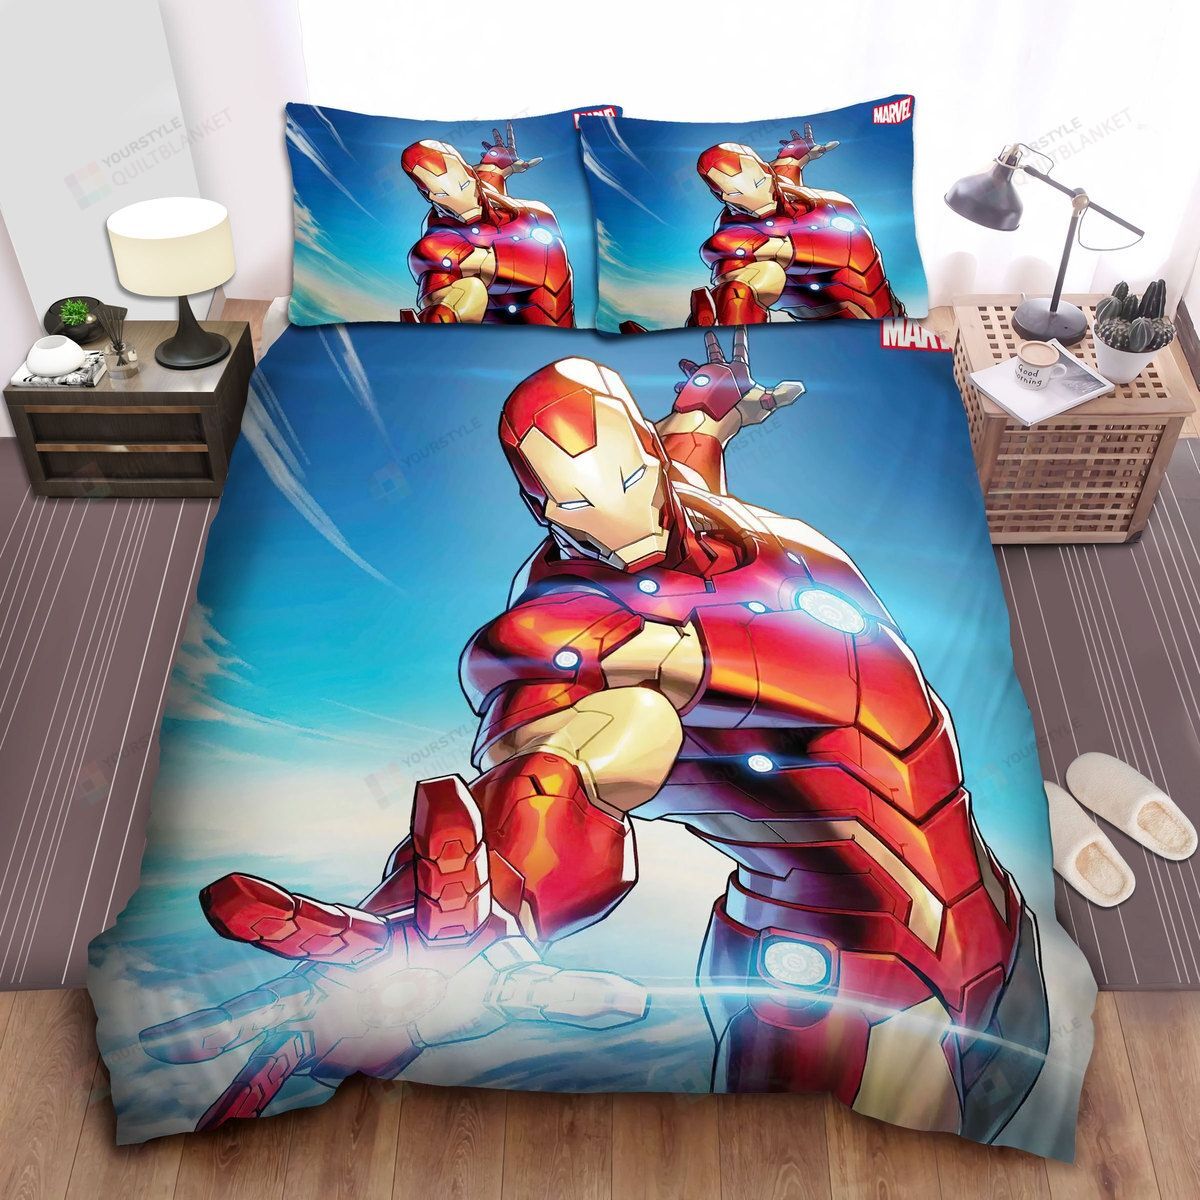 Marvel Iron Man Ready To Fire Repulsor Beam Bed Sheets Spread Comforter Duvet Cover Bedding Sets